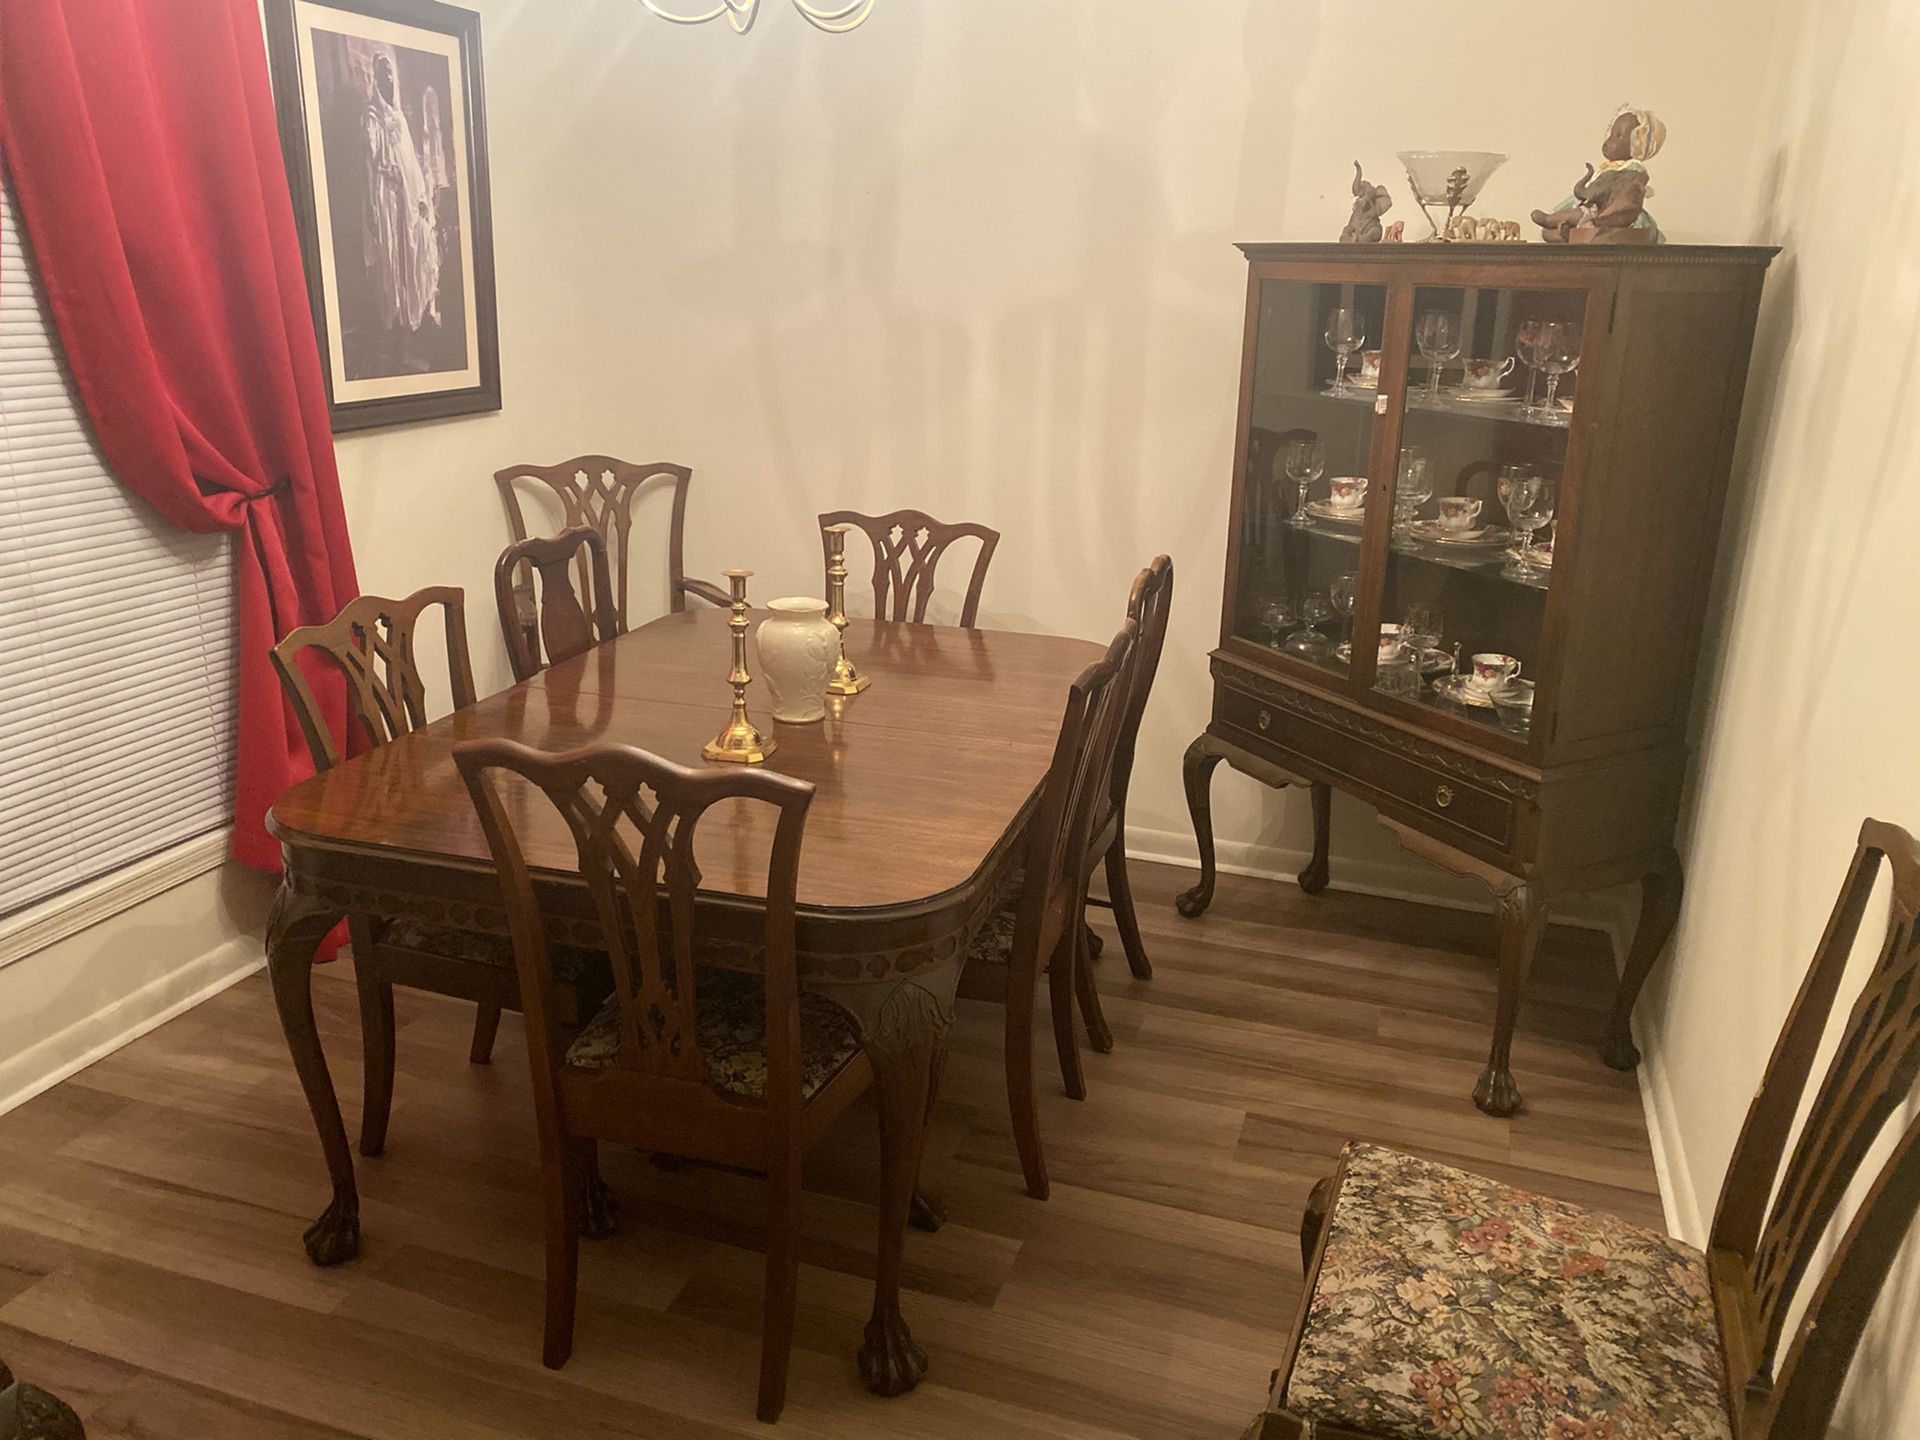 Antique table and chairs all wood